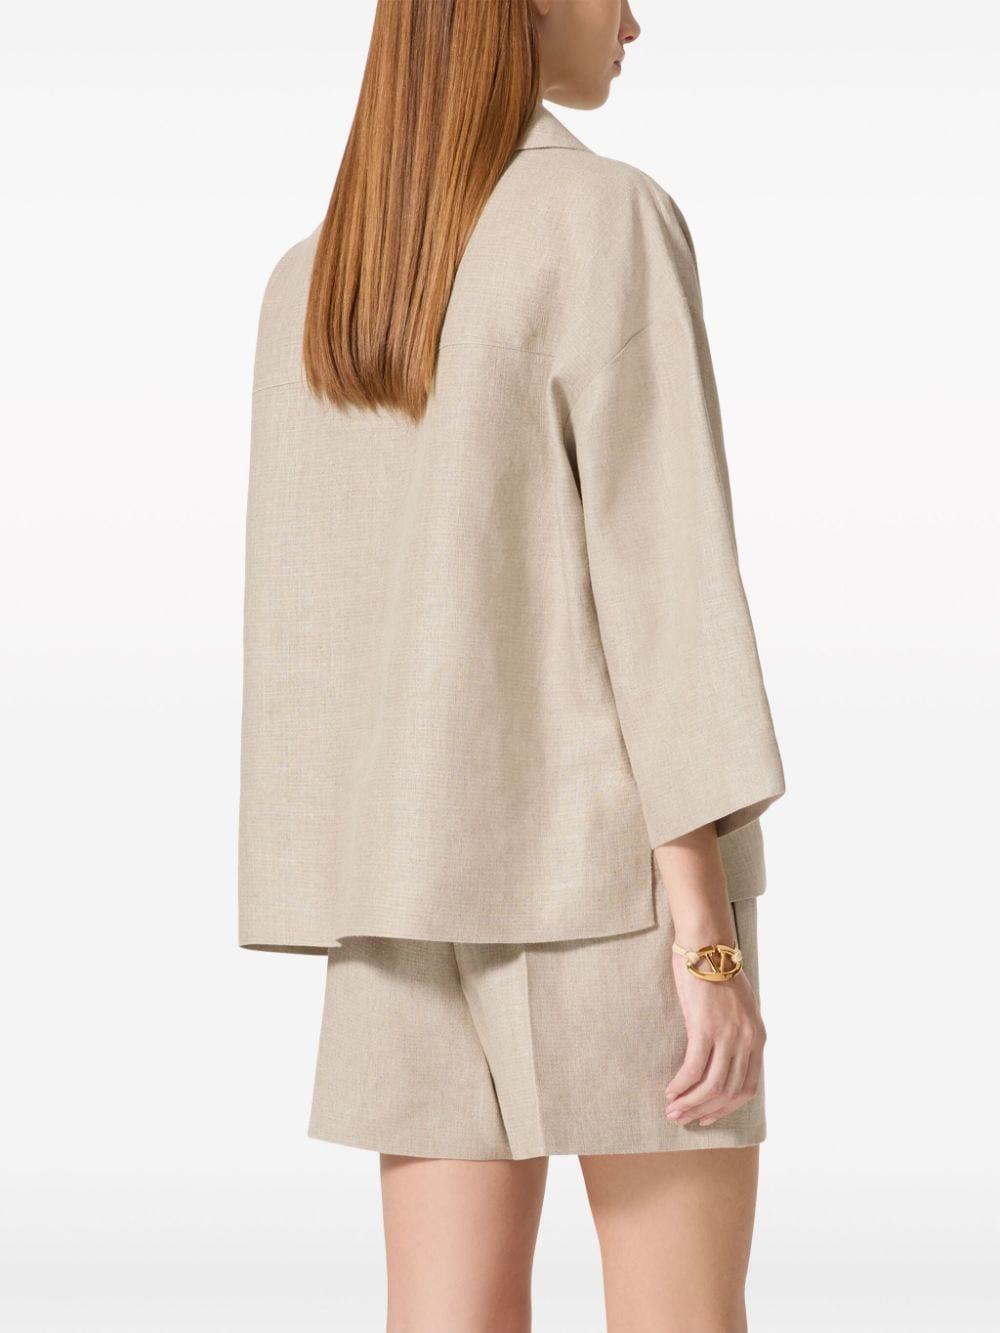 VALENTINO Beige Linen Top with Gold-Tone Logo Plaque and Three-Quarter Length Sleeves